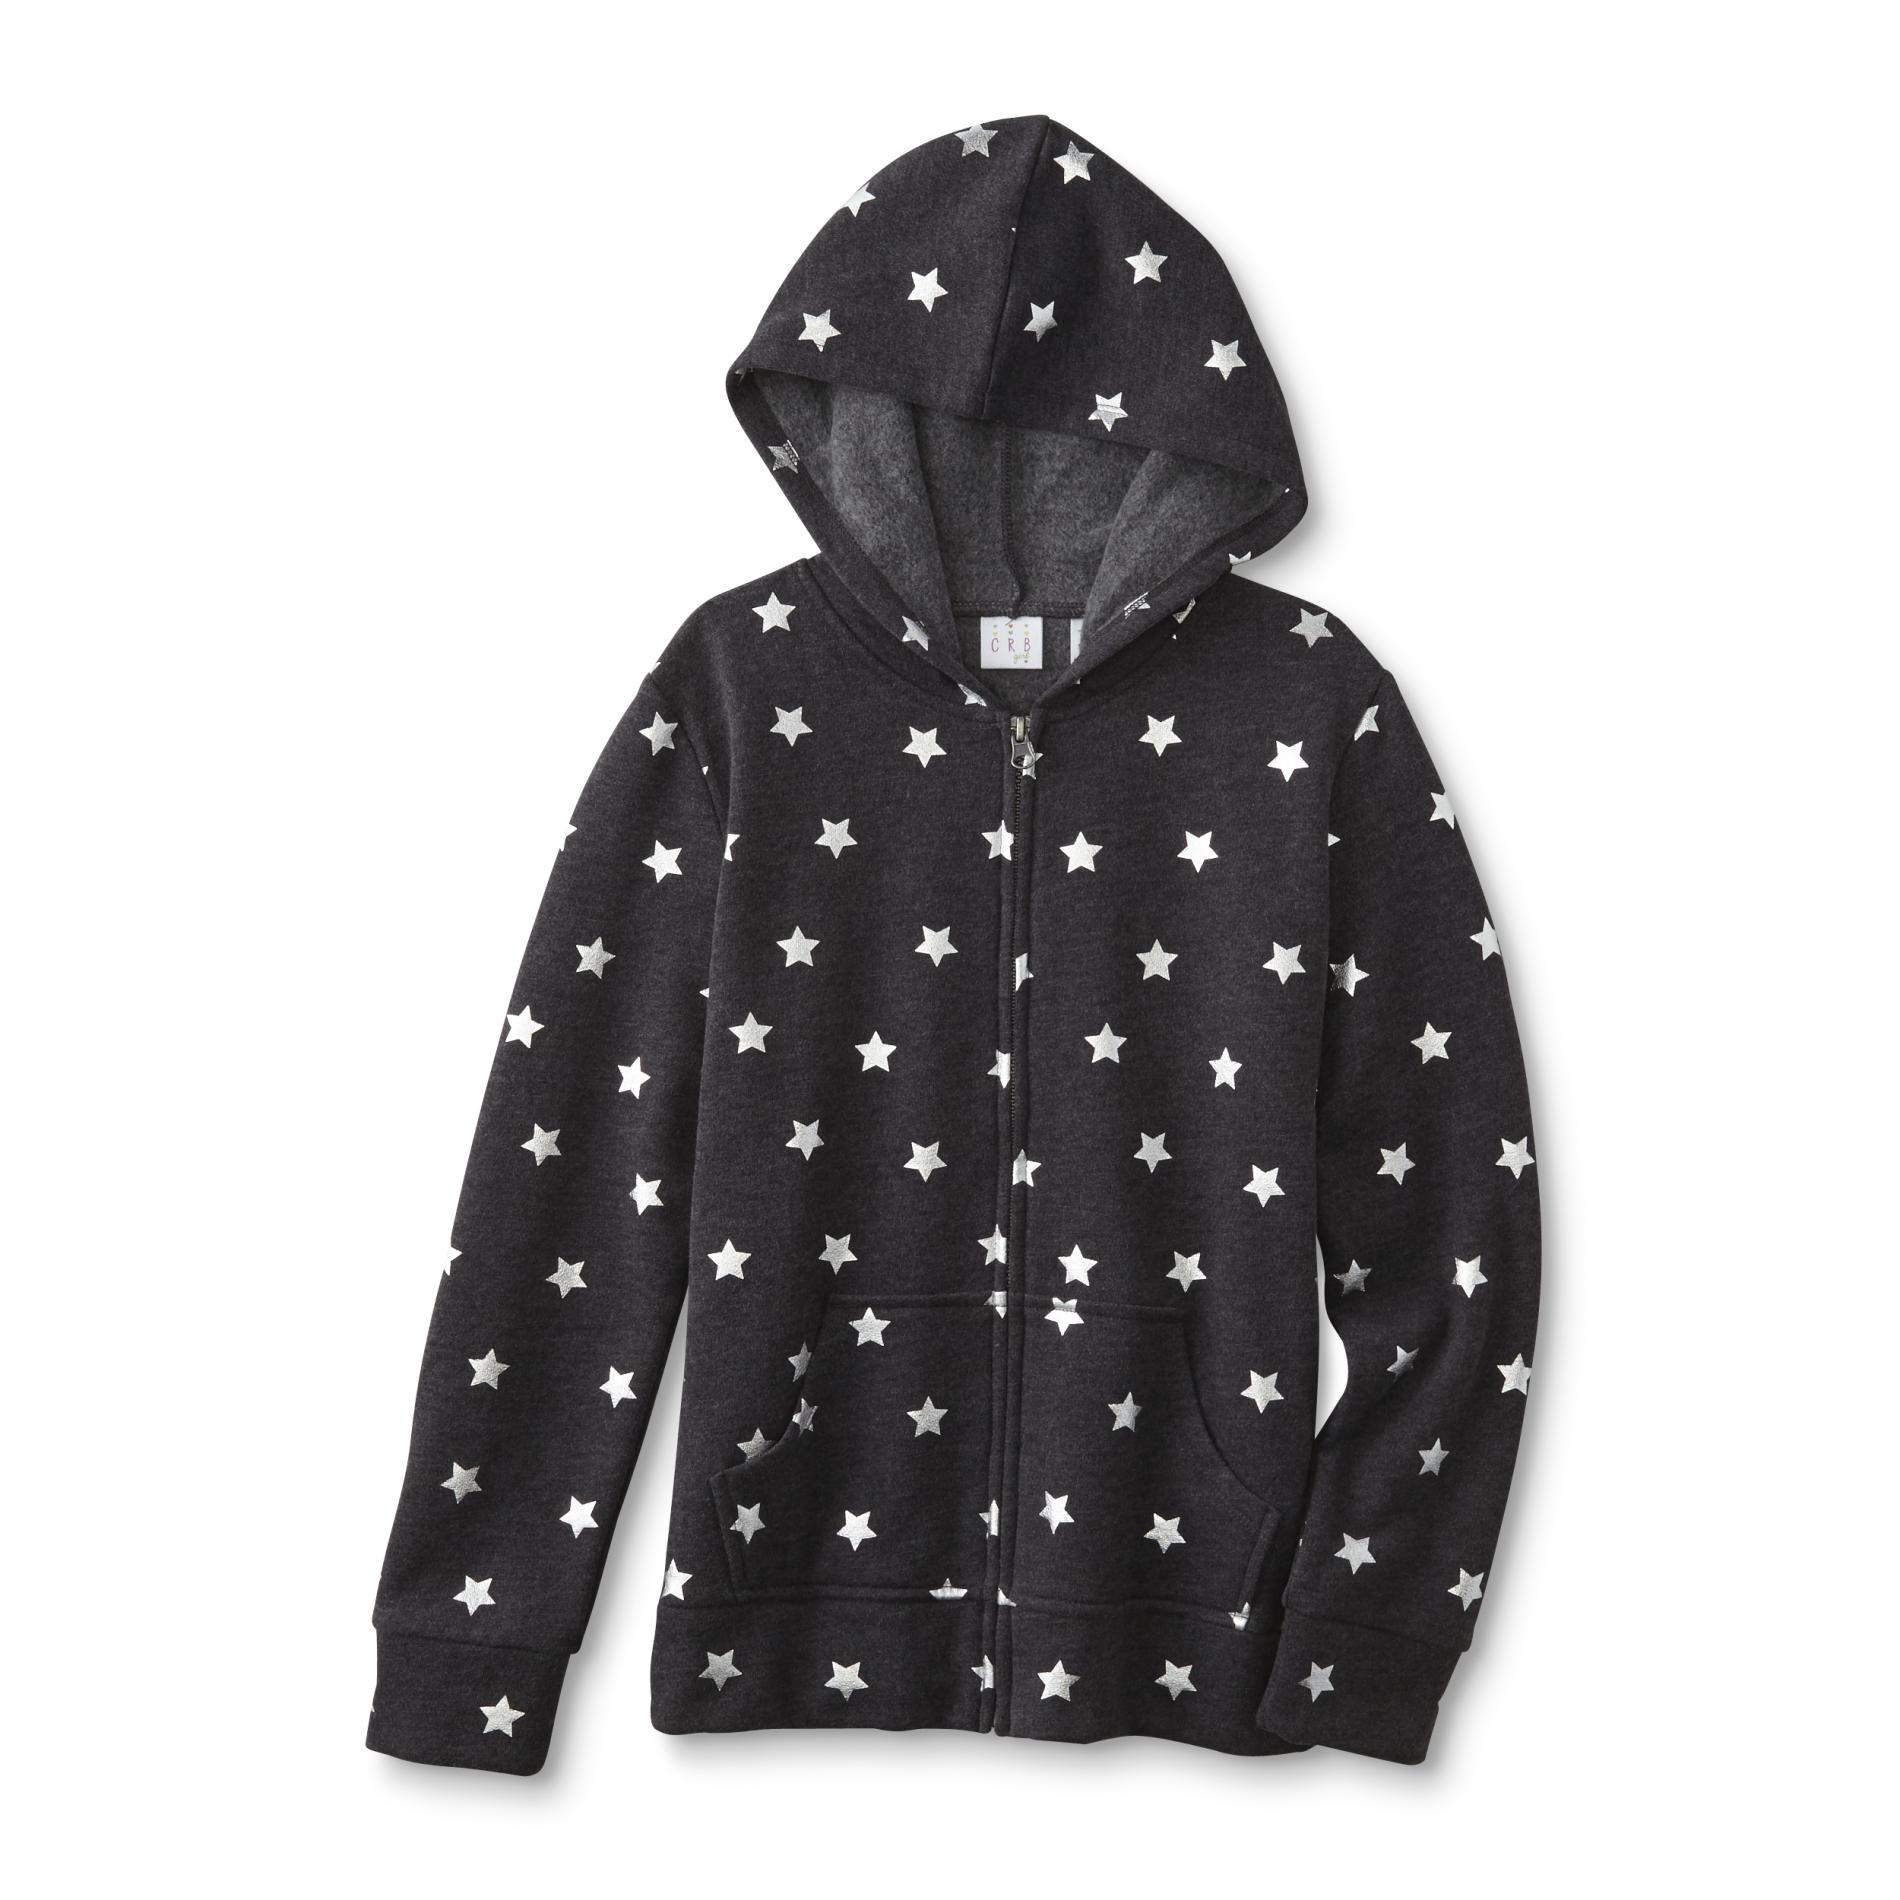 Canyon River Blues Girl's Graphic Hoodie Jacket - Stars